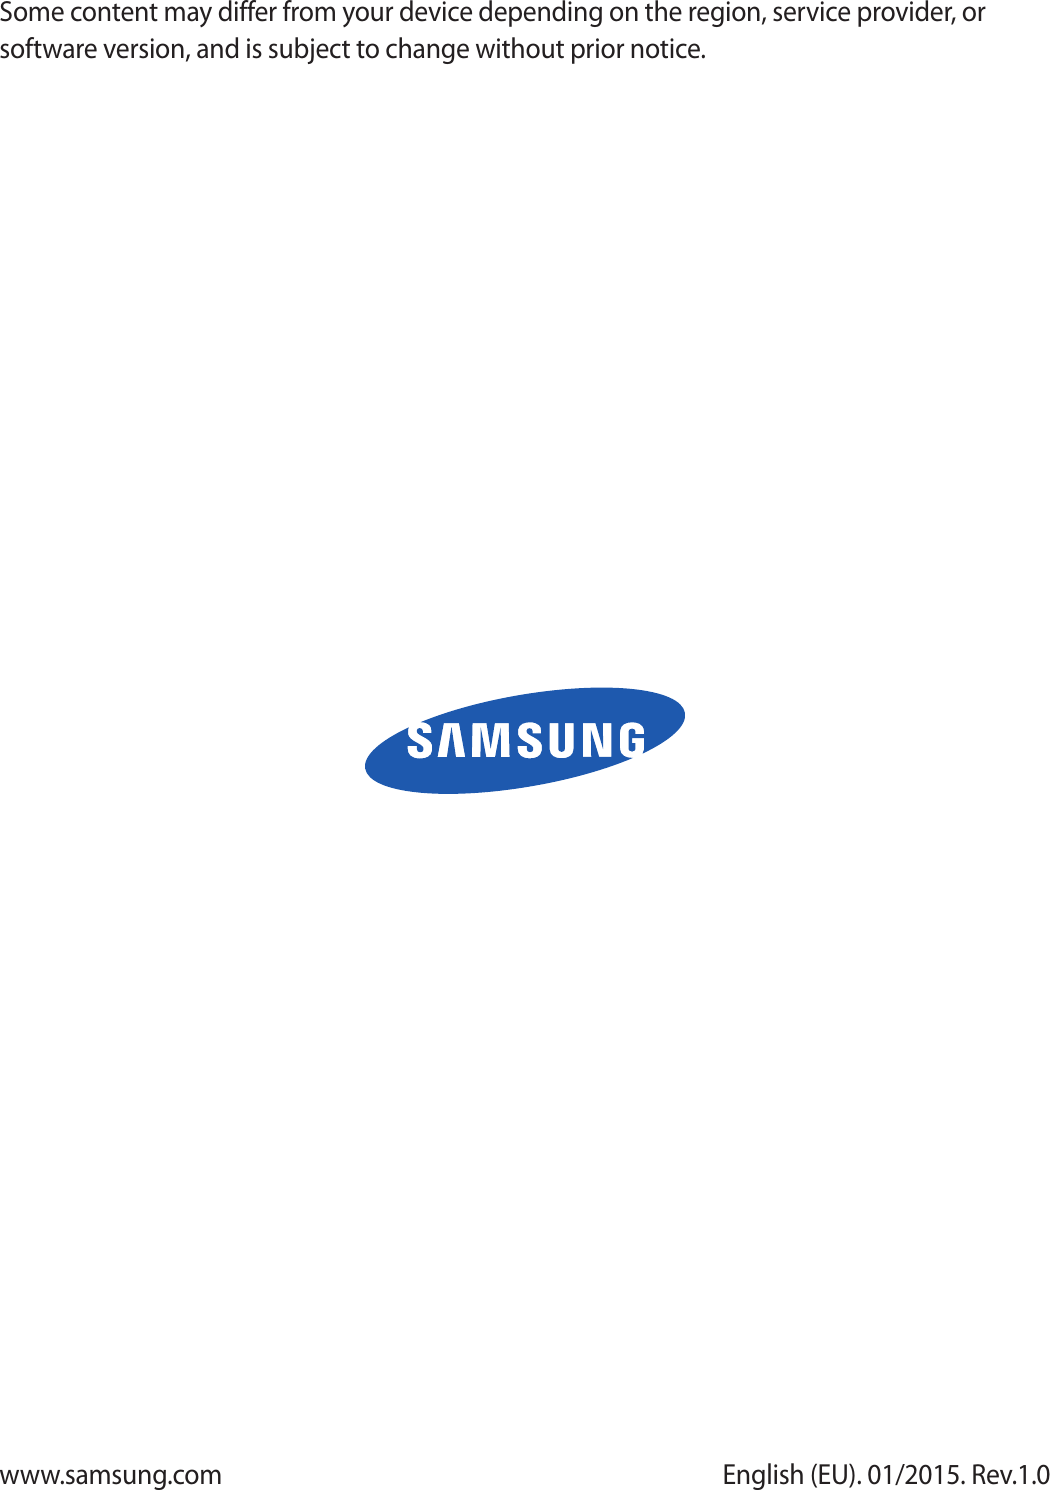 Some content may differ from your device depending on the region, service provider, or software version, and is subject to change without prior notice.www.samsung.com English (EU). 01/2015. Rev.1.0